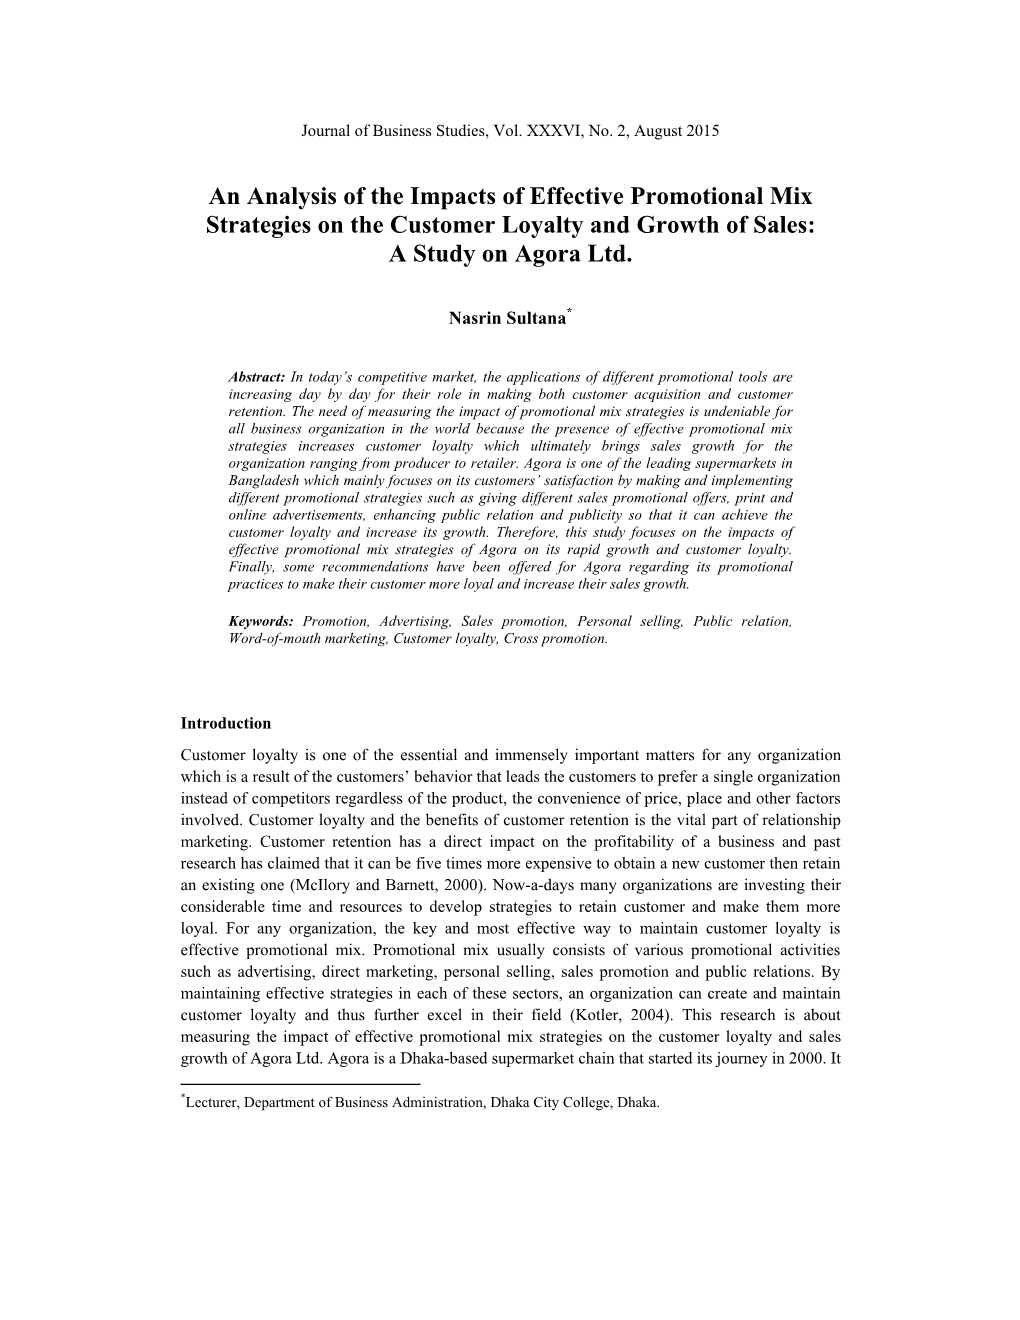 An Analysis of the Impacts of Effective Promotional Mix Strategies on the Customer Loyalty and Growth of Sales: a Study on Agora Ltd